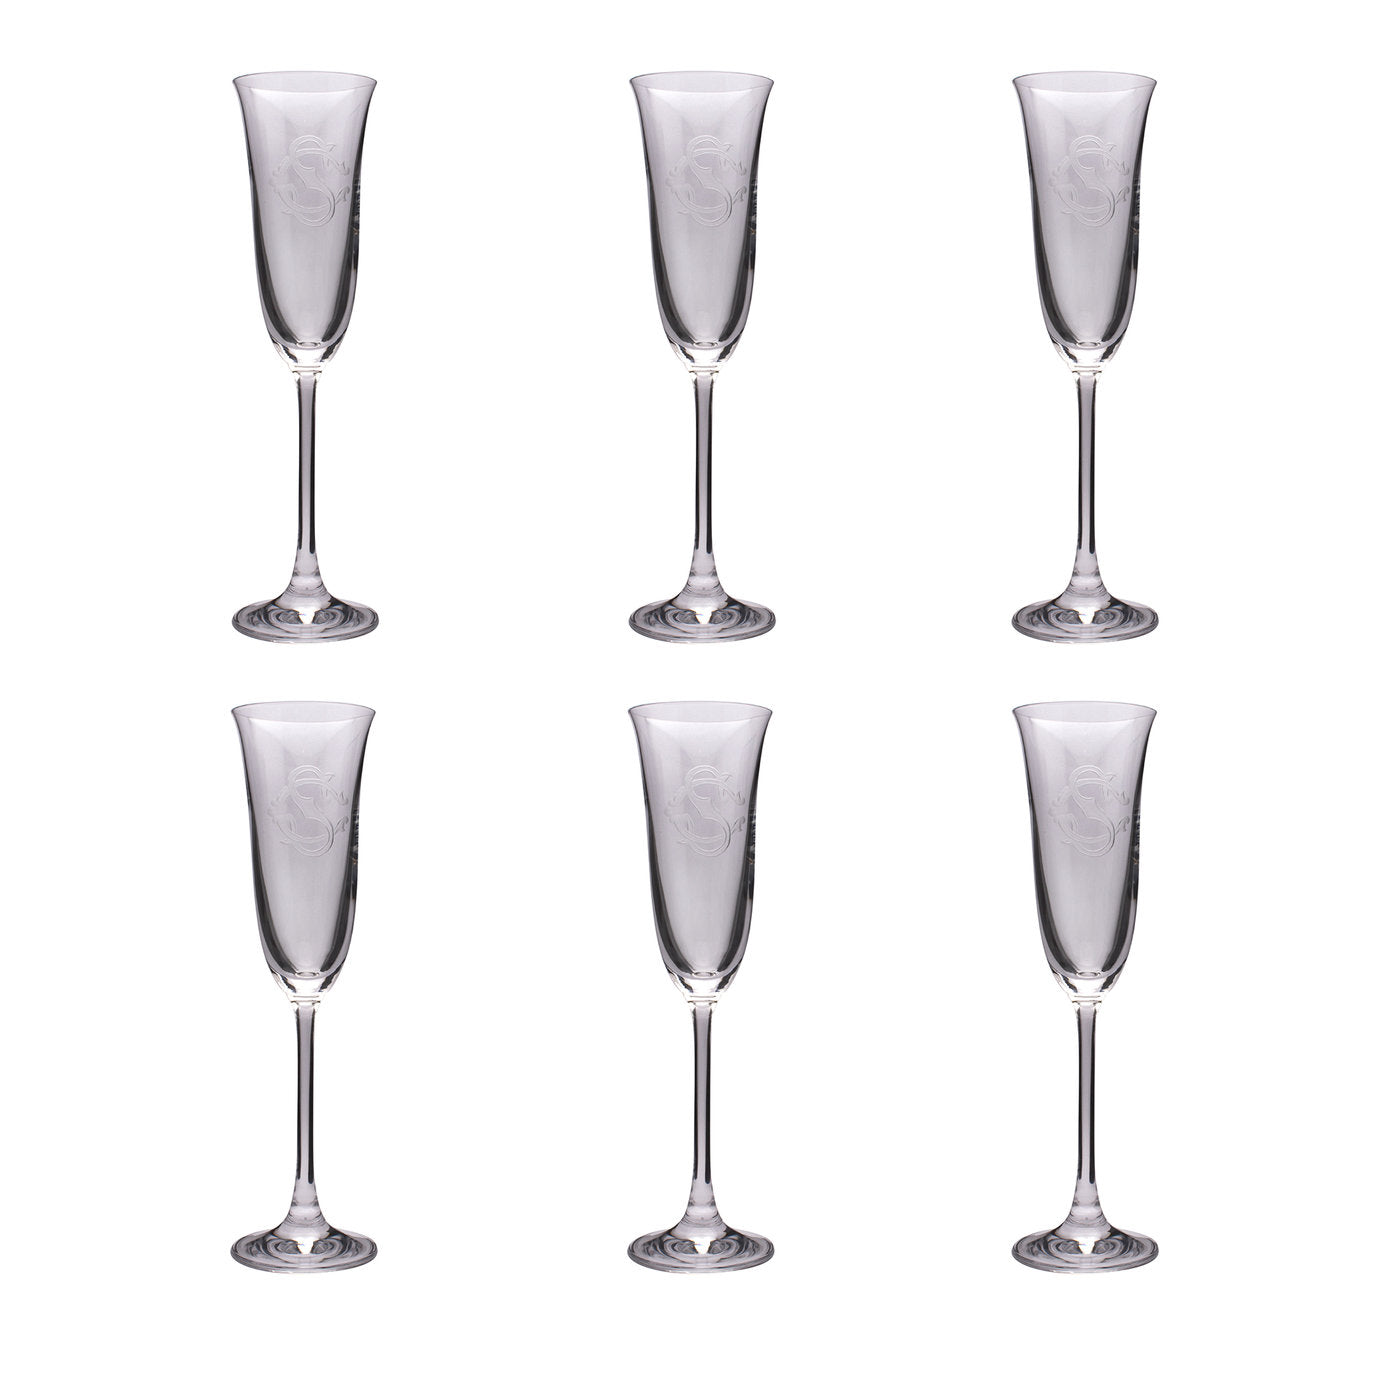 Set of 6 Champagne Flutes with Monogram - Alternative view 1